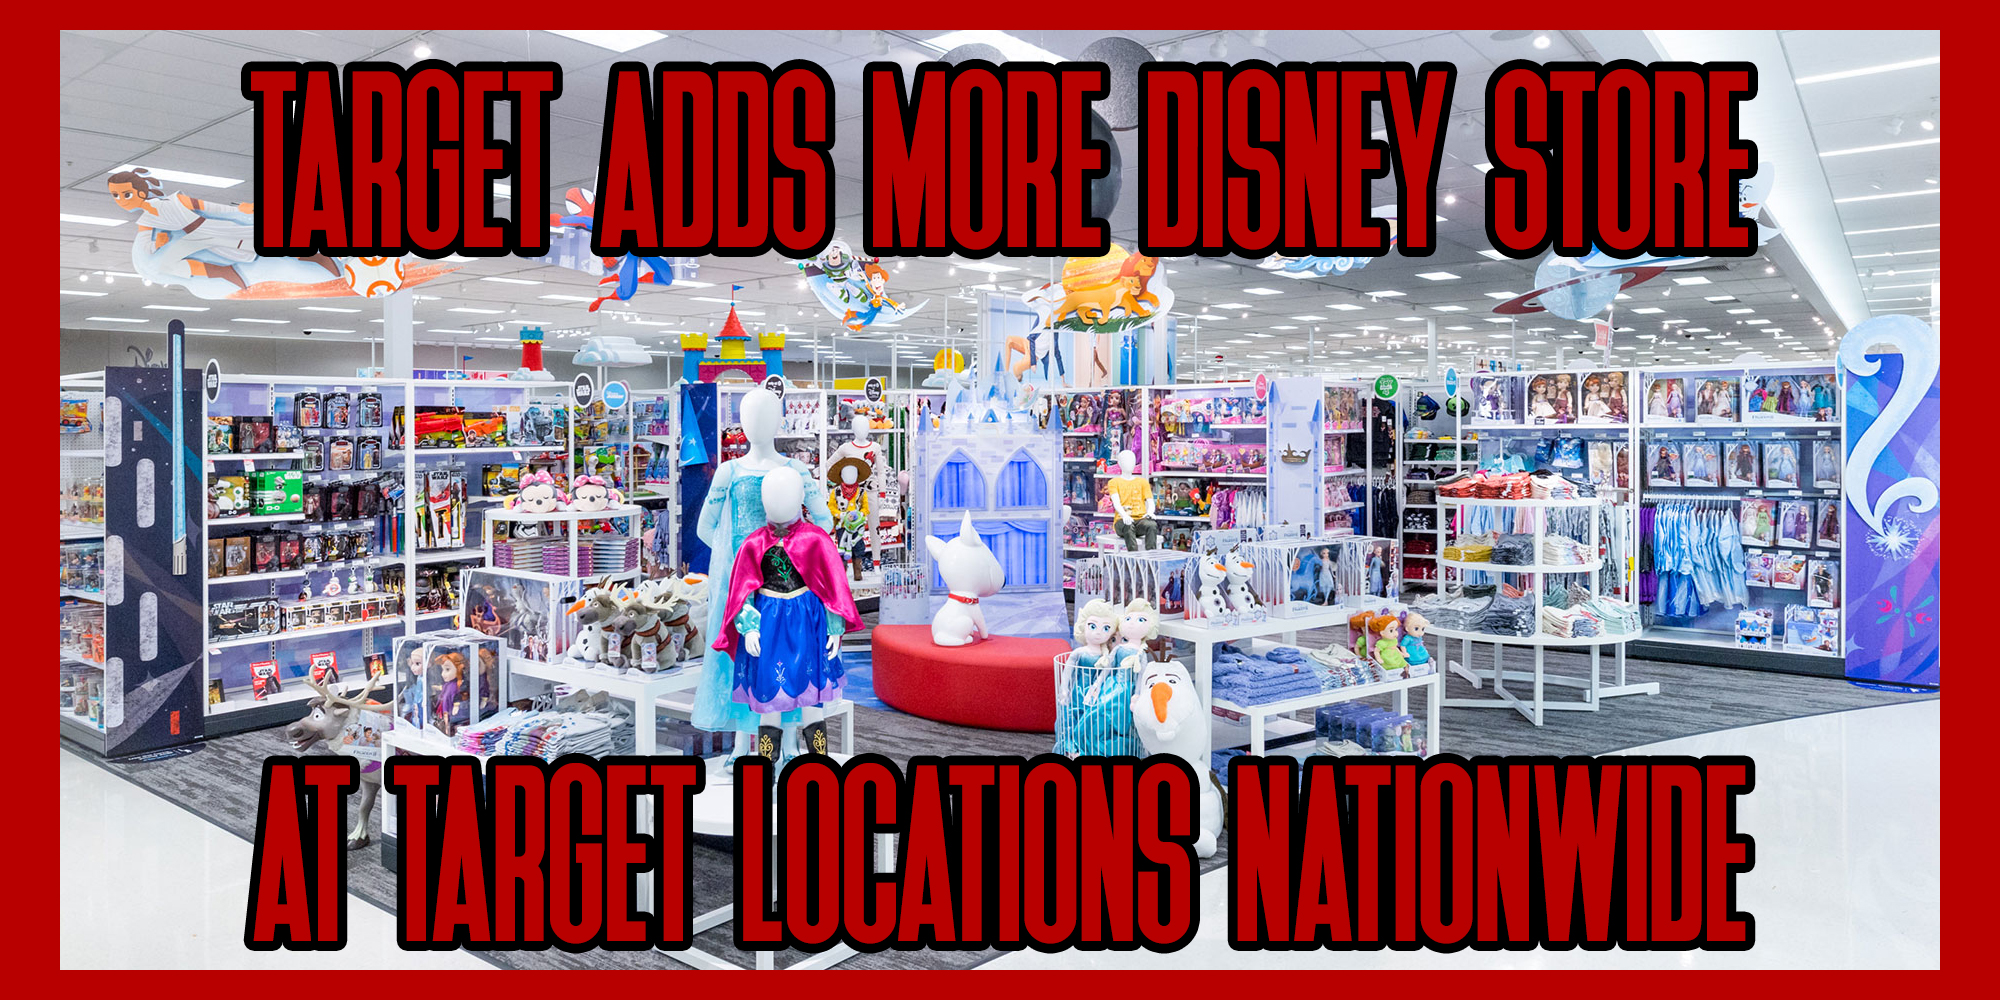 Target To add more Disney Store